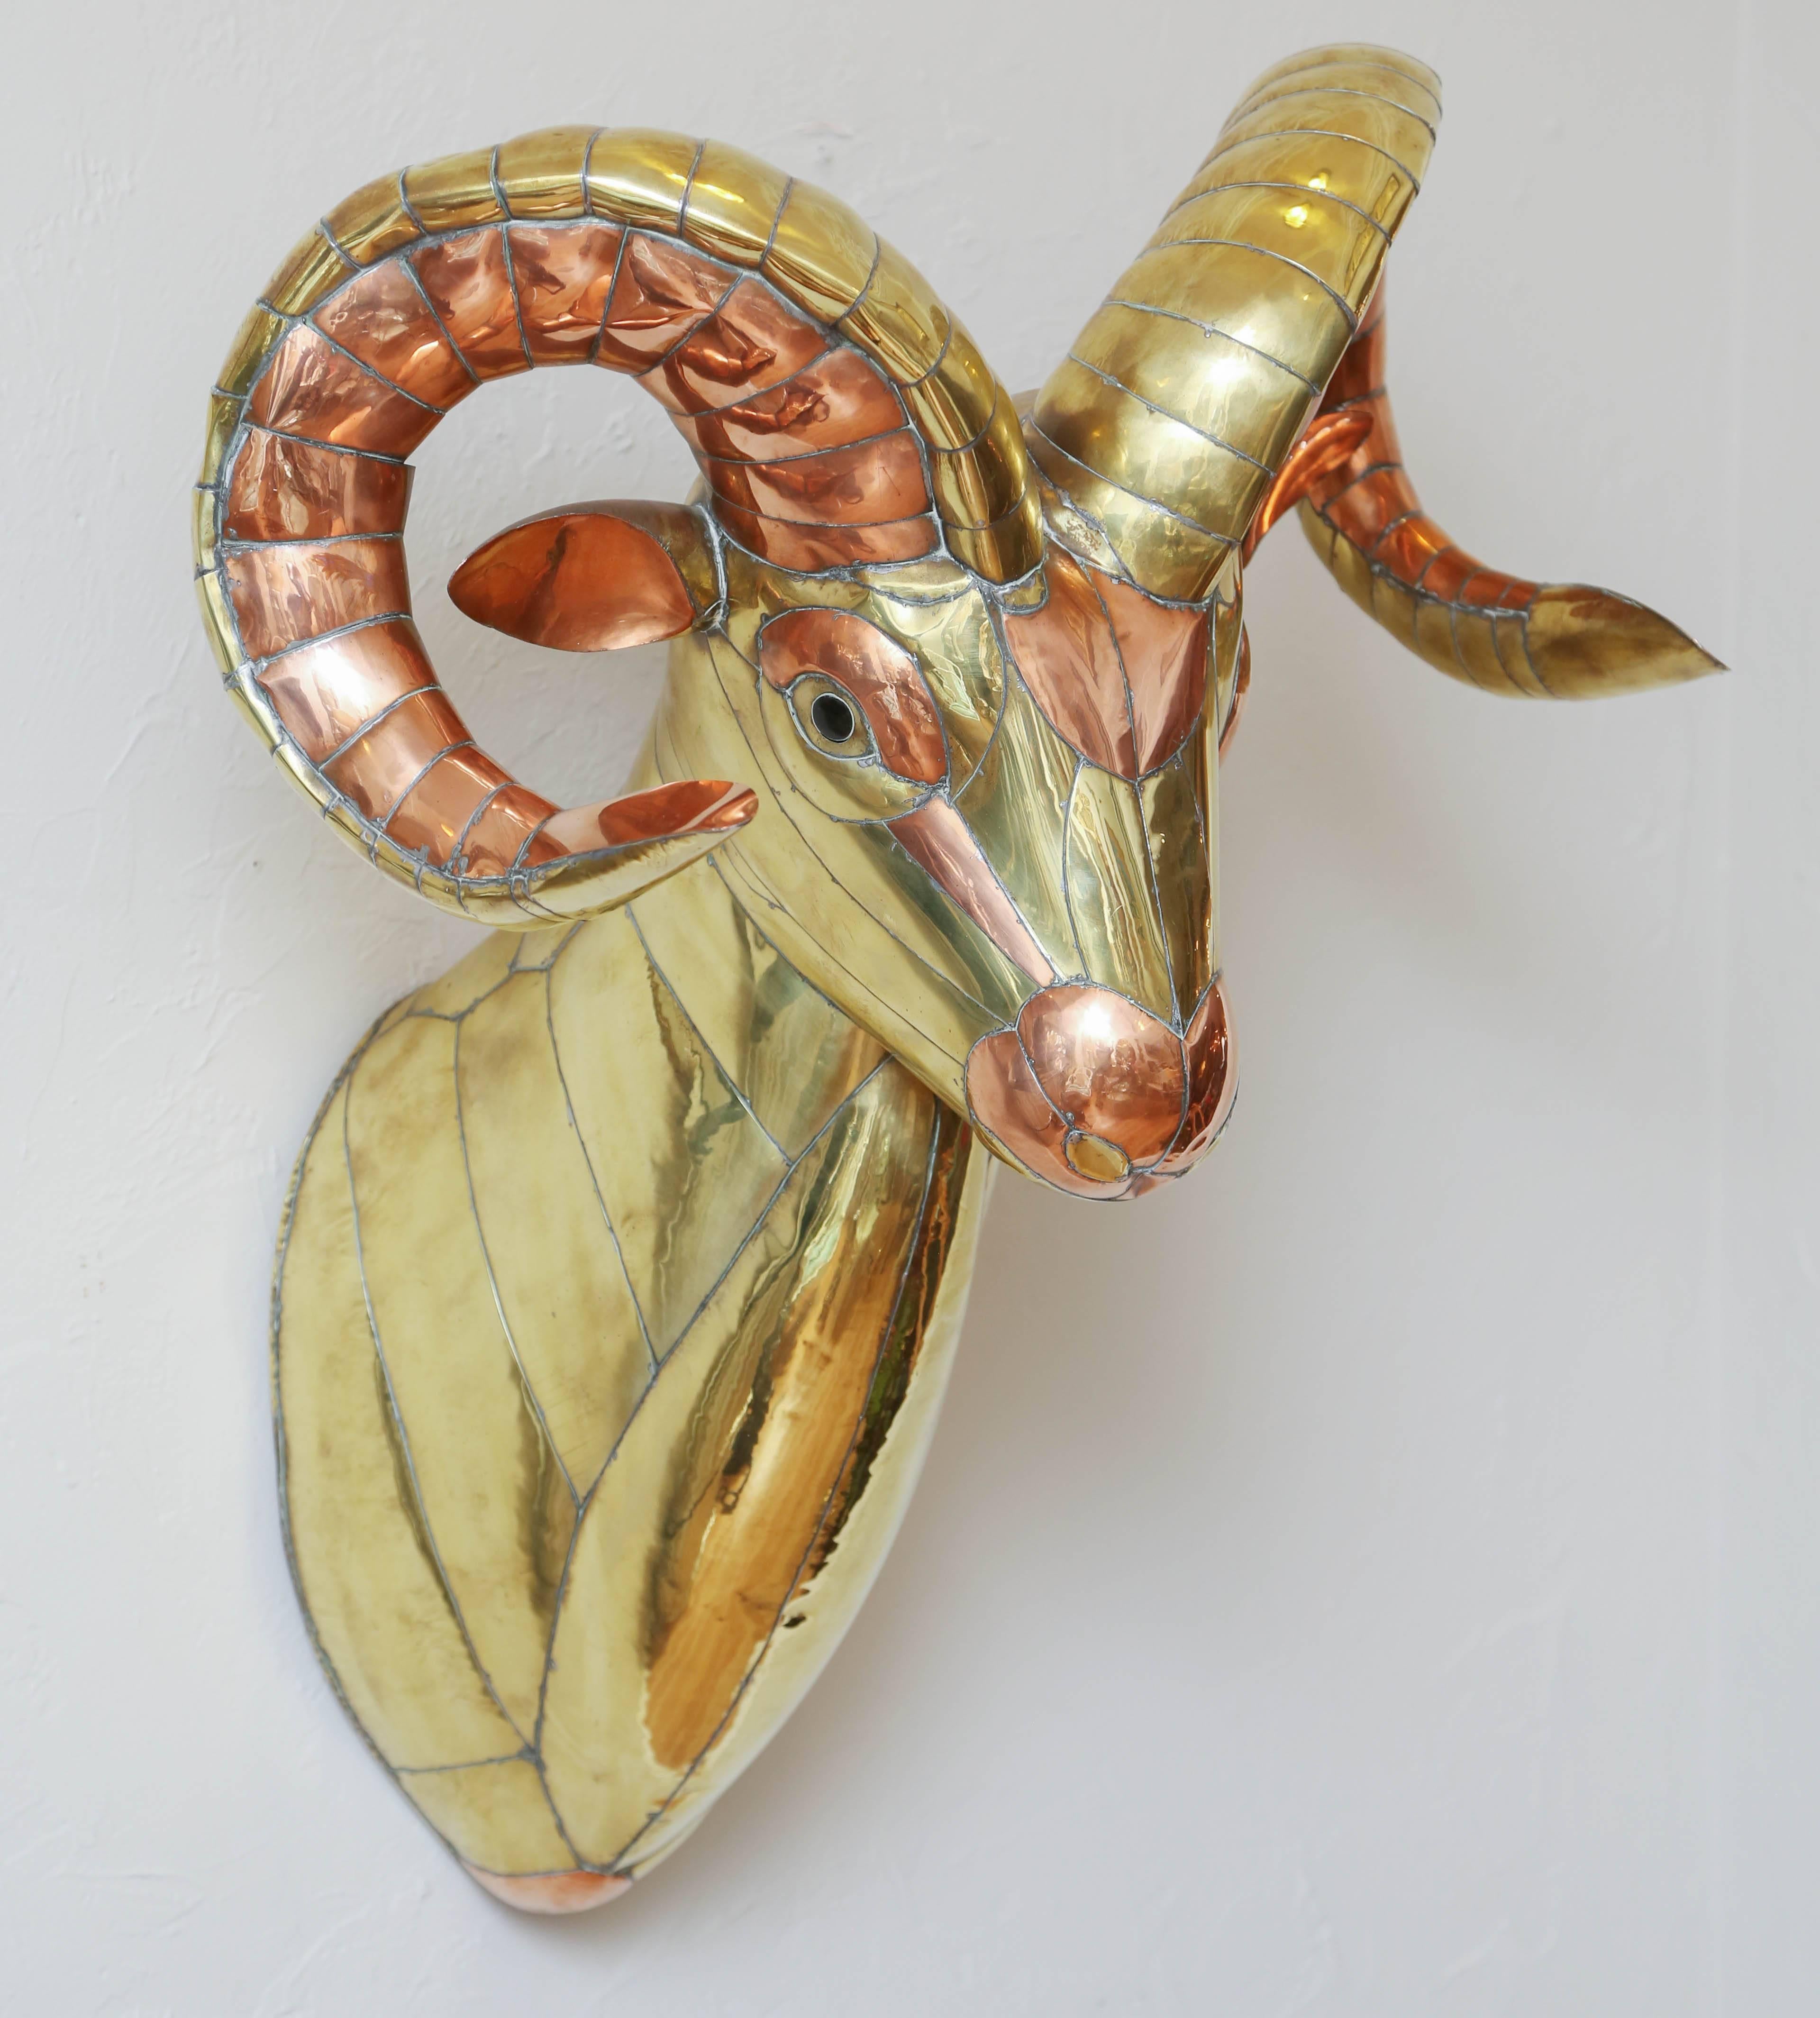 Midcentury brass and copper ram's head sculpture by Sergio Bustamante.